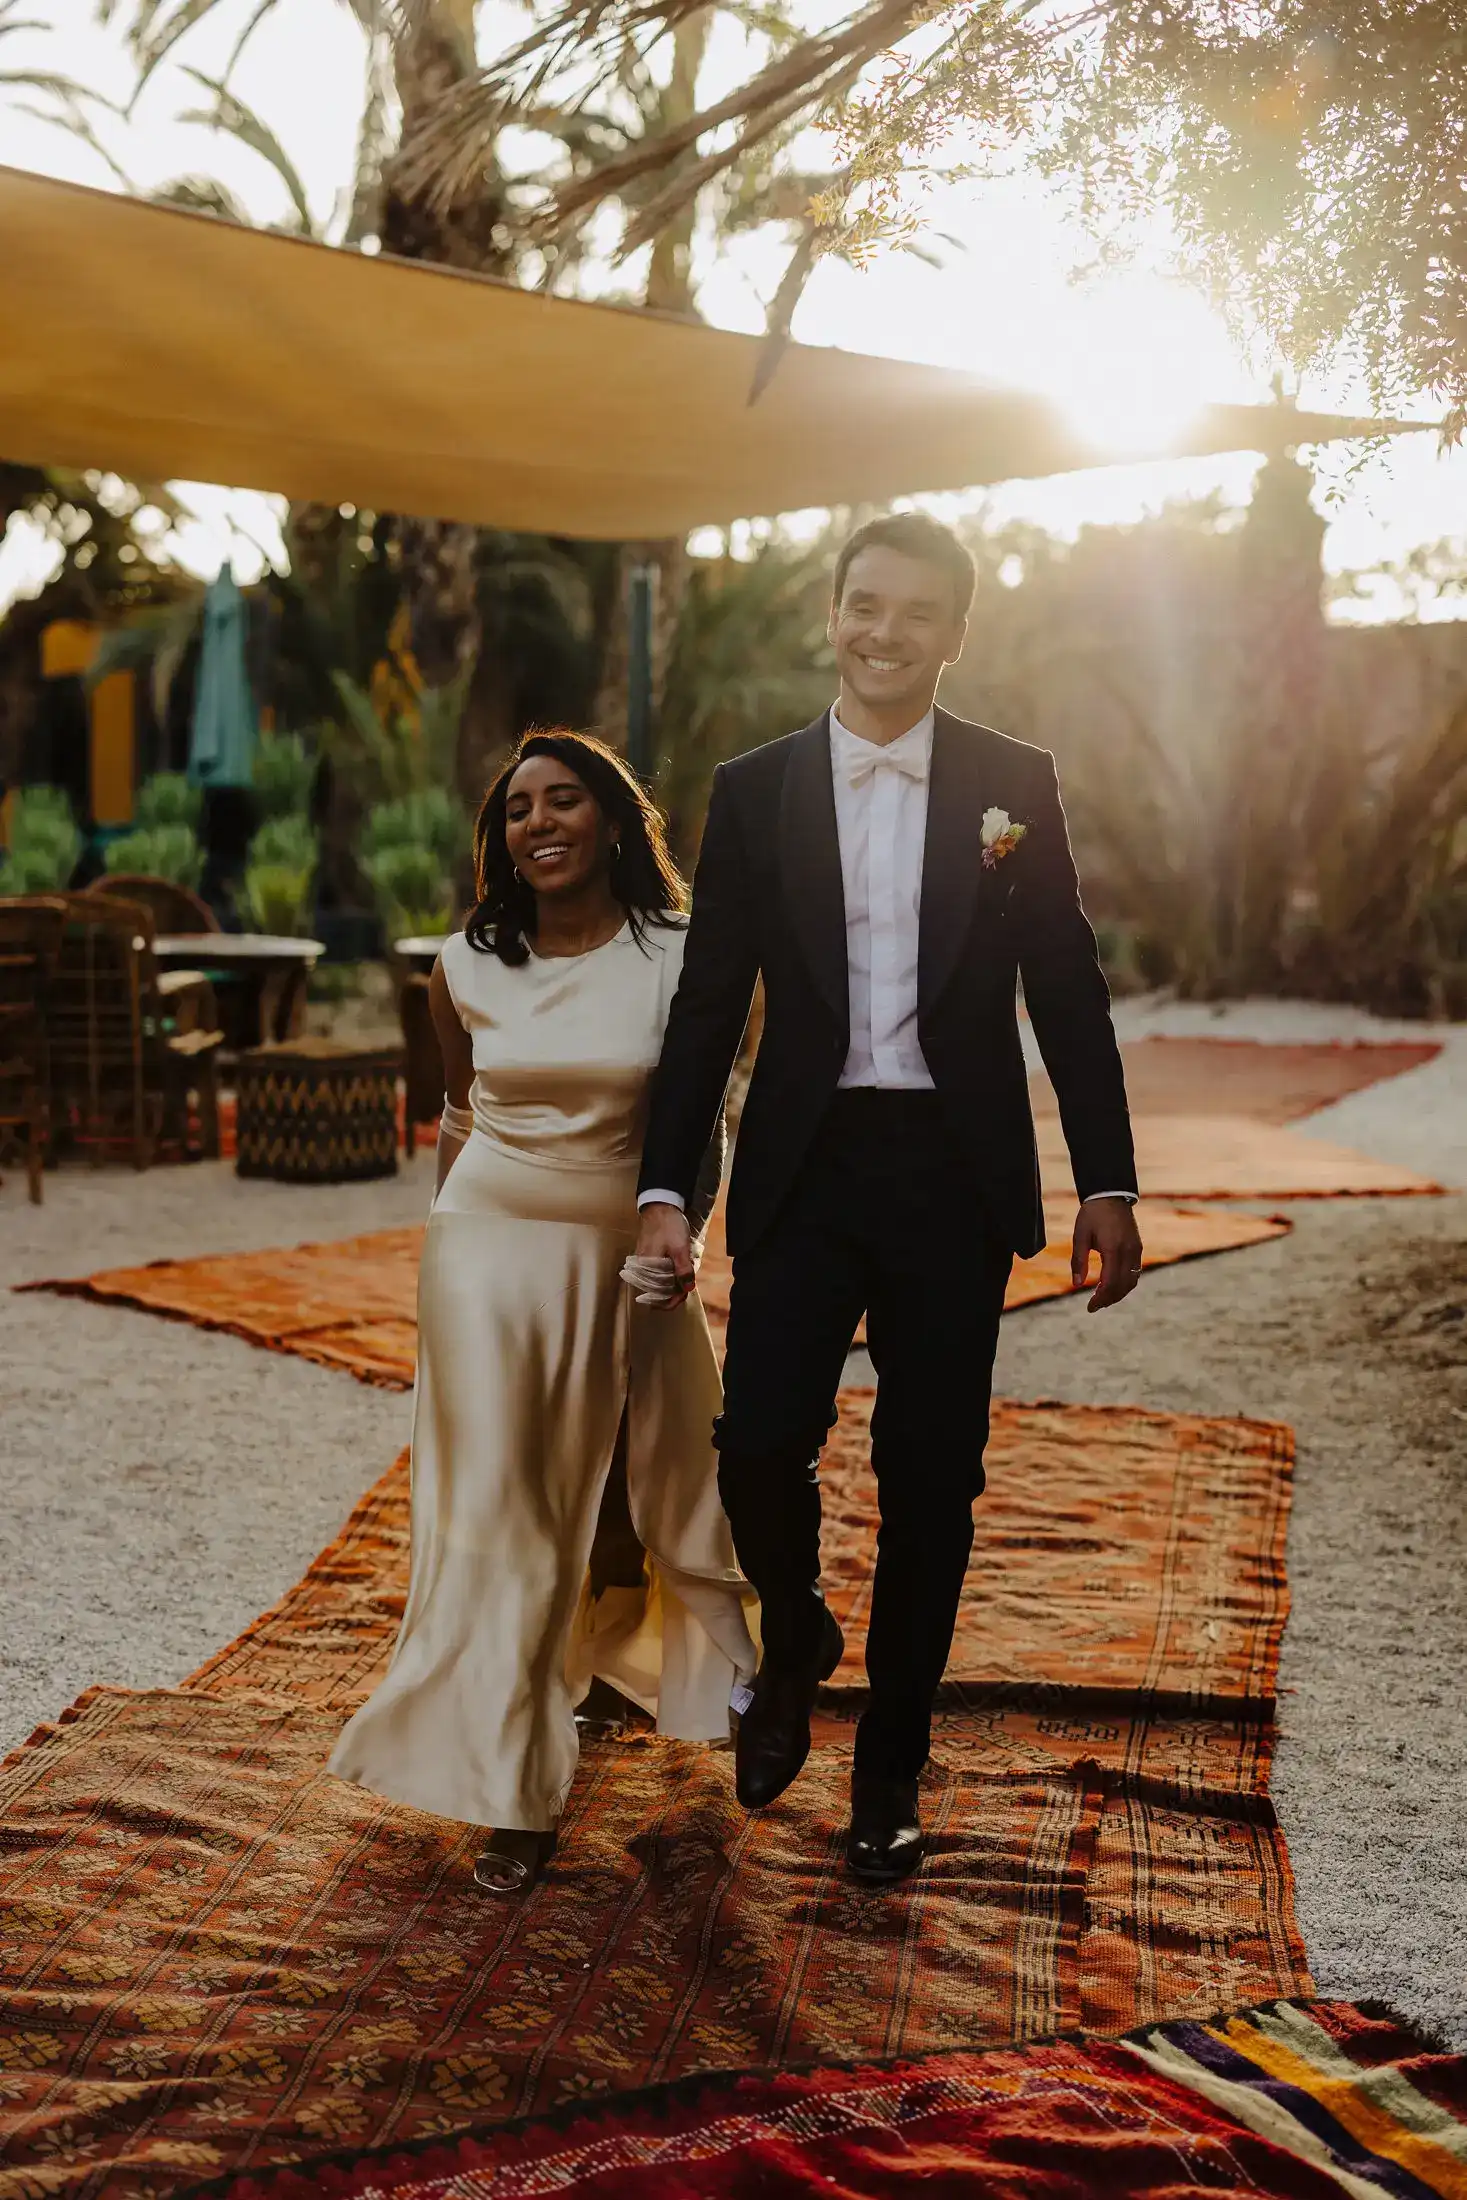 A Magical multicultural Wedding in Marrakech: The Union of Raissa and Arnaud